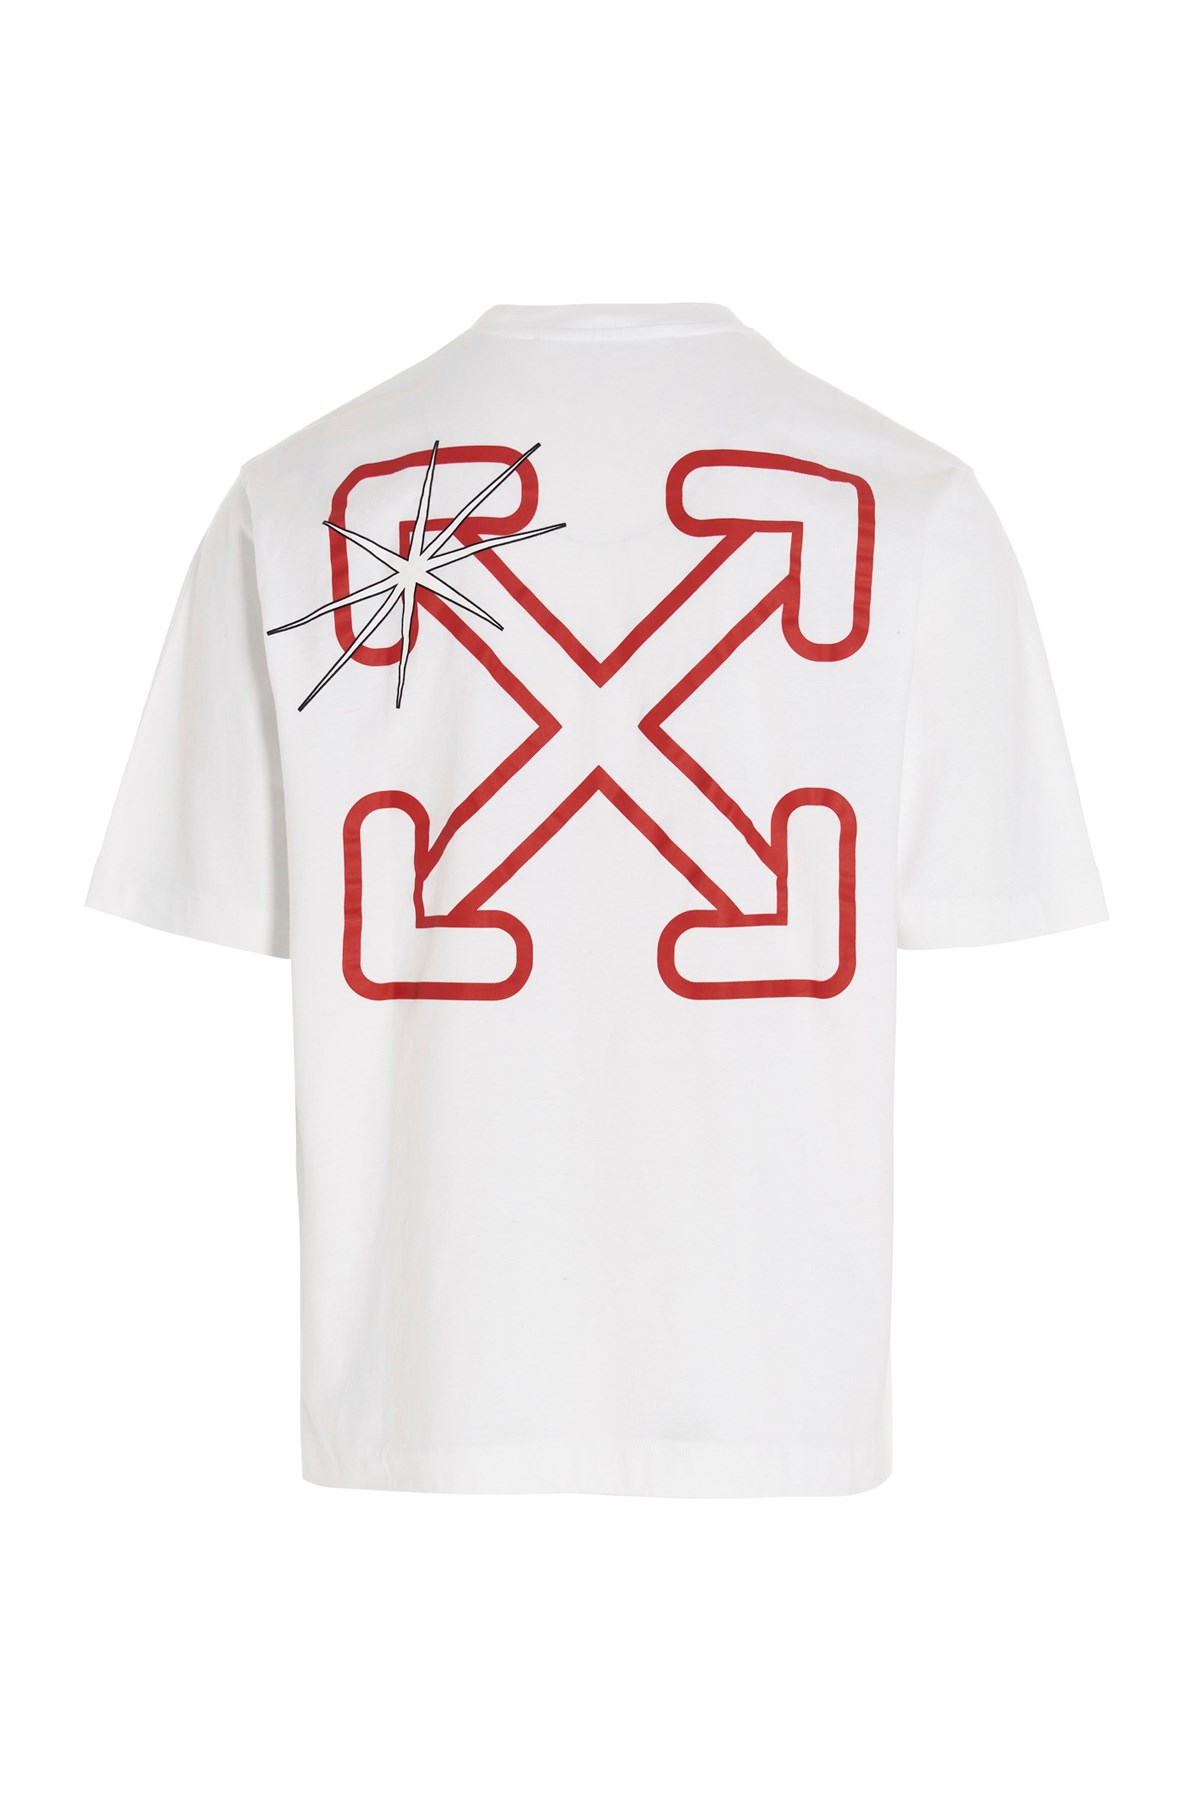 OFF-WHITE T-Shirt 'Starred Arrow'